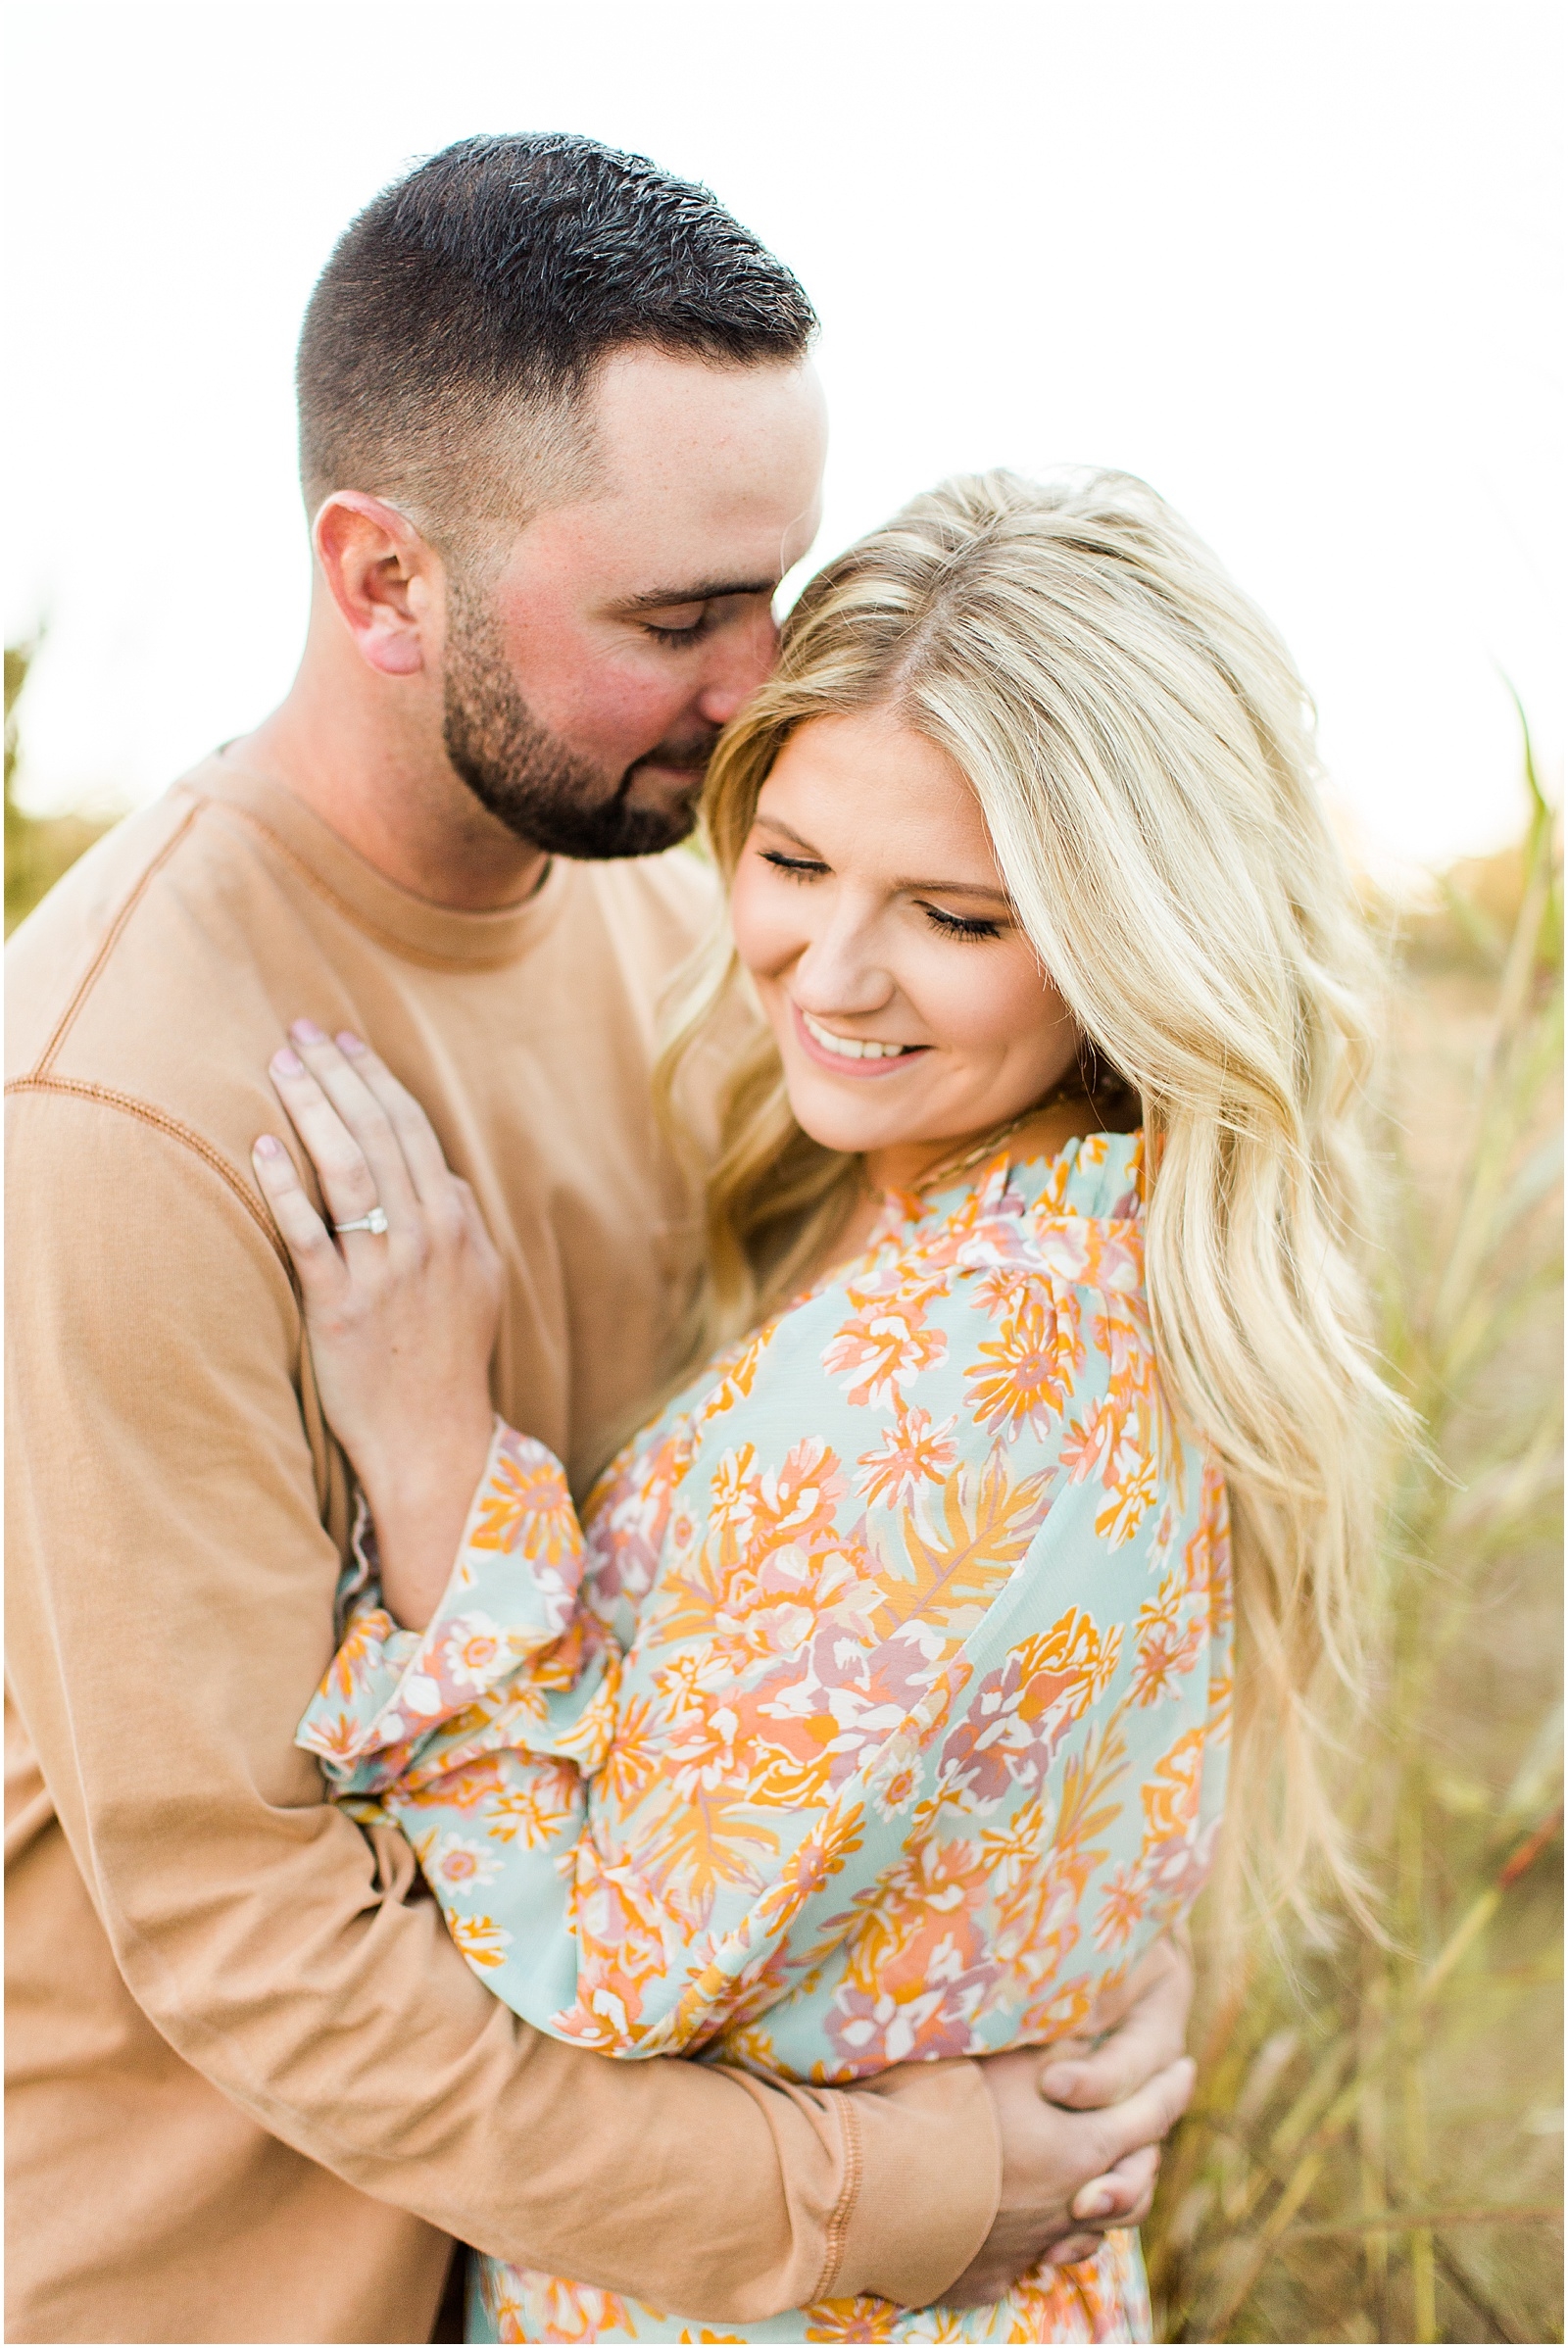 A Southern Indiana Engagement Session | Charleston and Erin | Bret and Brandie Photography019.jpg